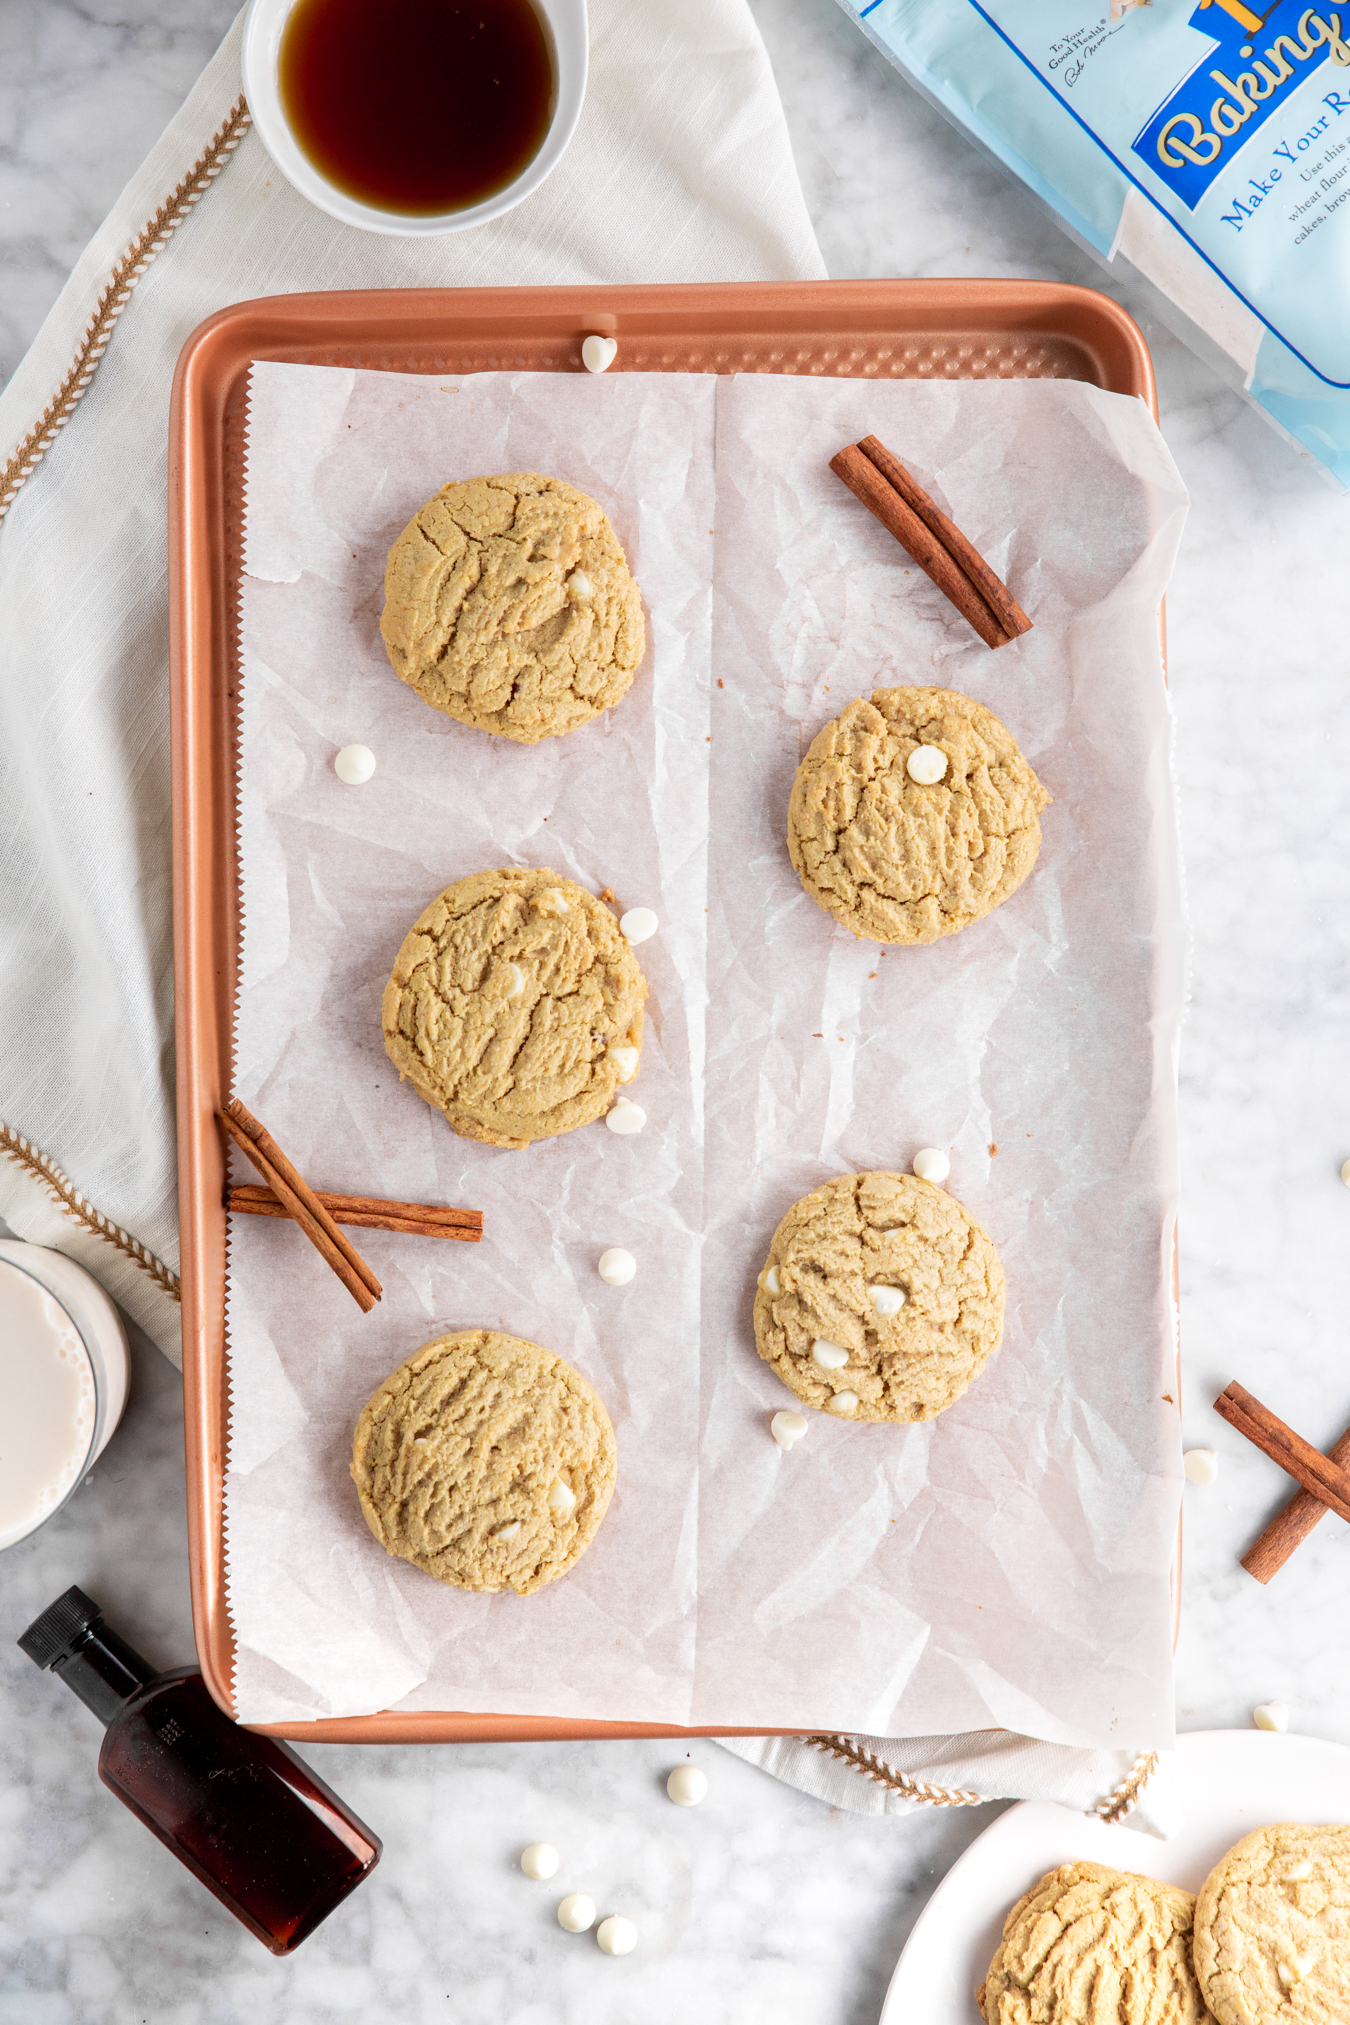 Gluten-Free maple white chocolate cookies baked and fresh out of the oven on a baking sheet